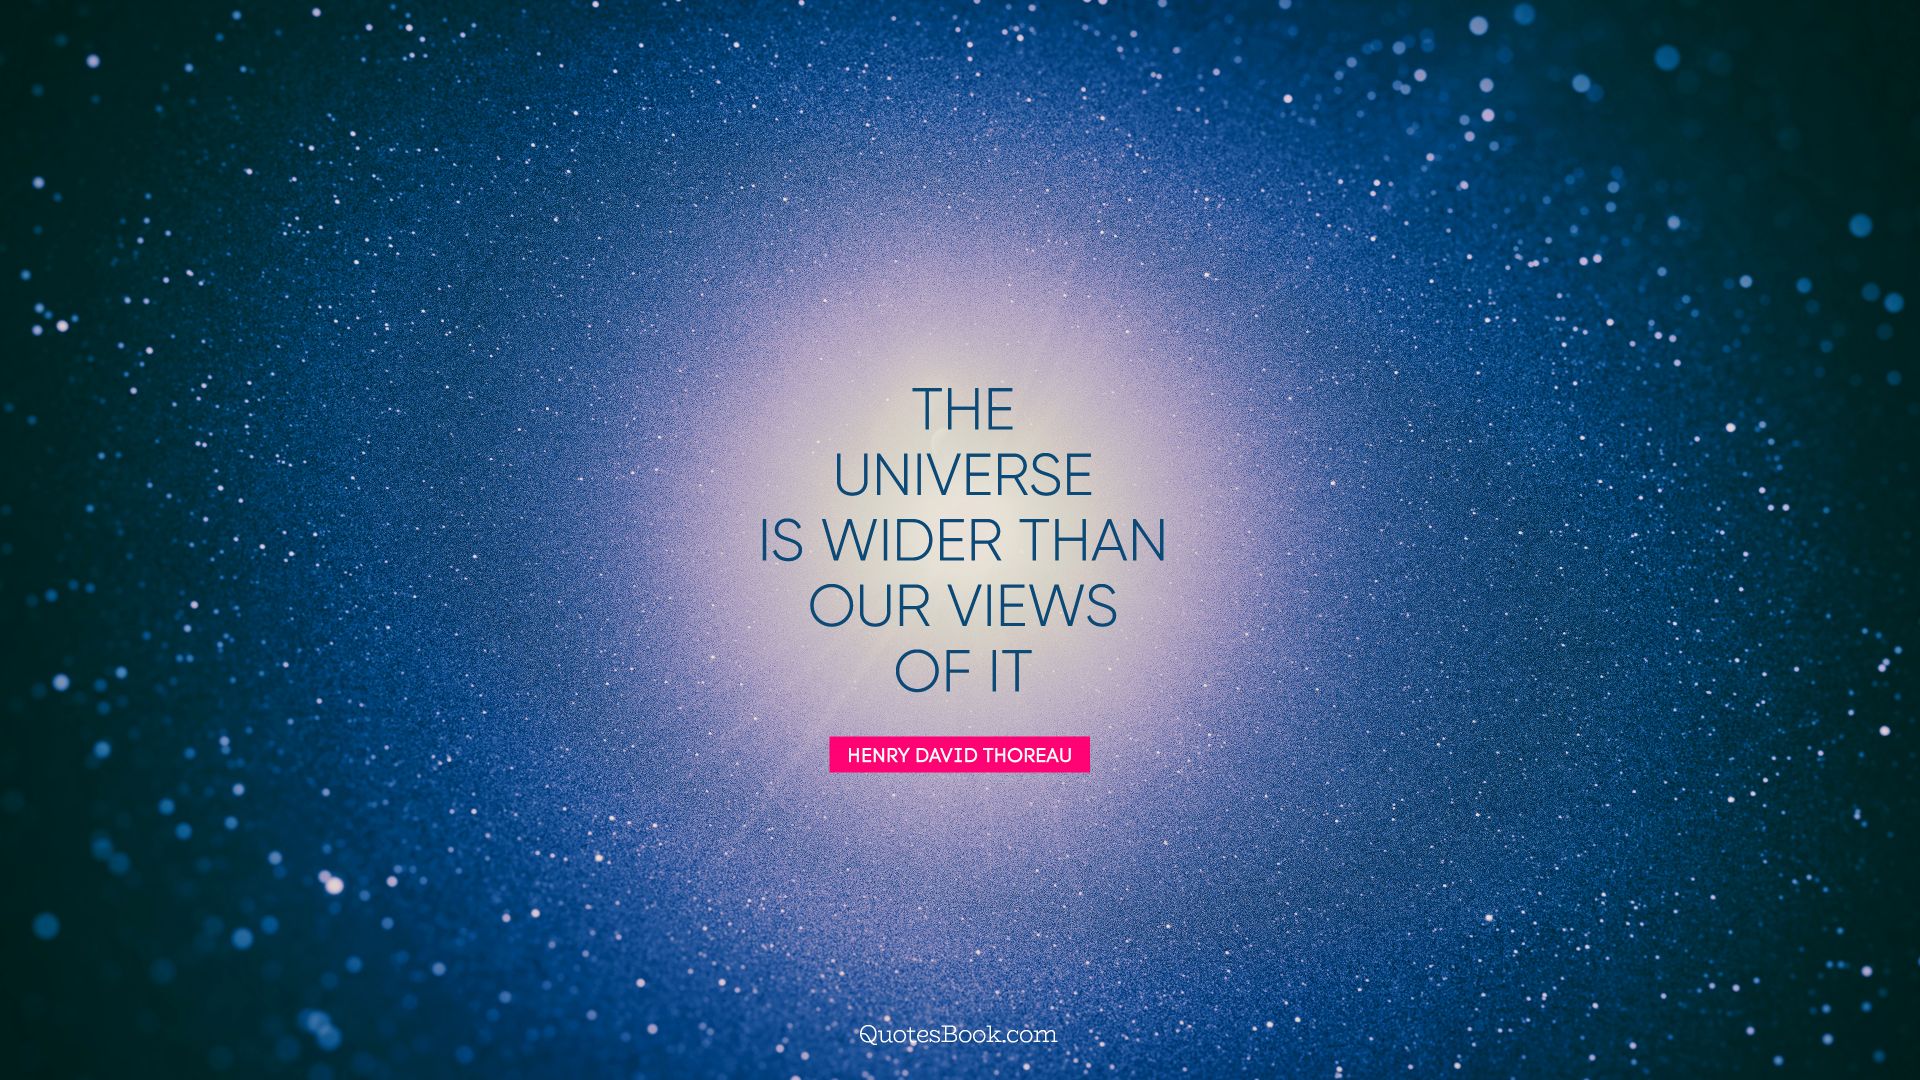 The universe is wider than our views of it. - Quote by Henry David Thoreau